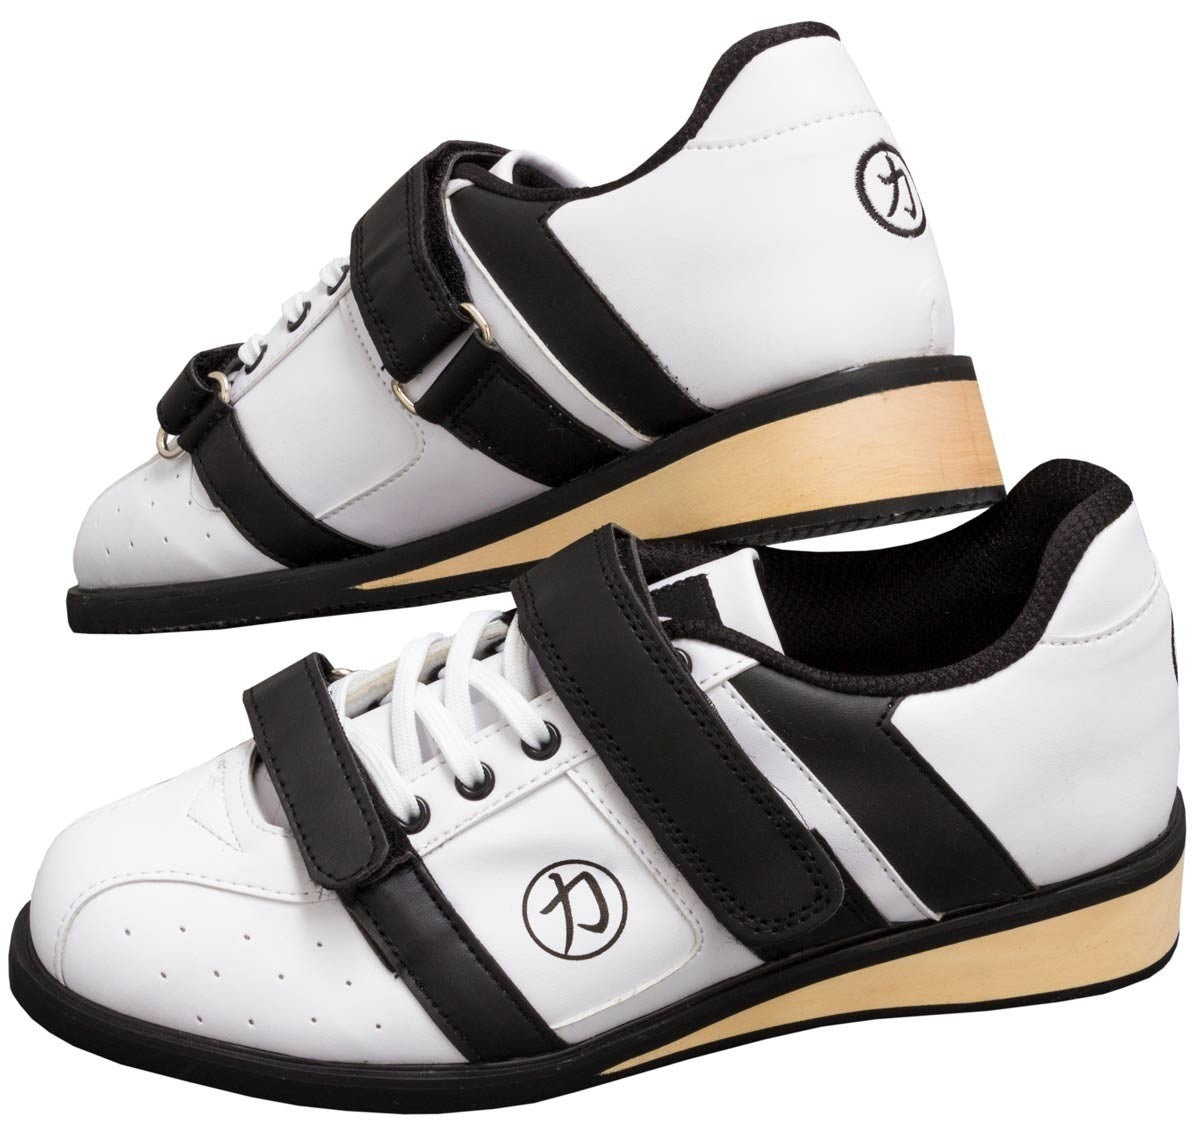 weightlifting shoes with 1 inch heel